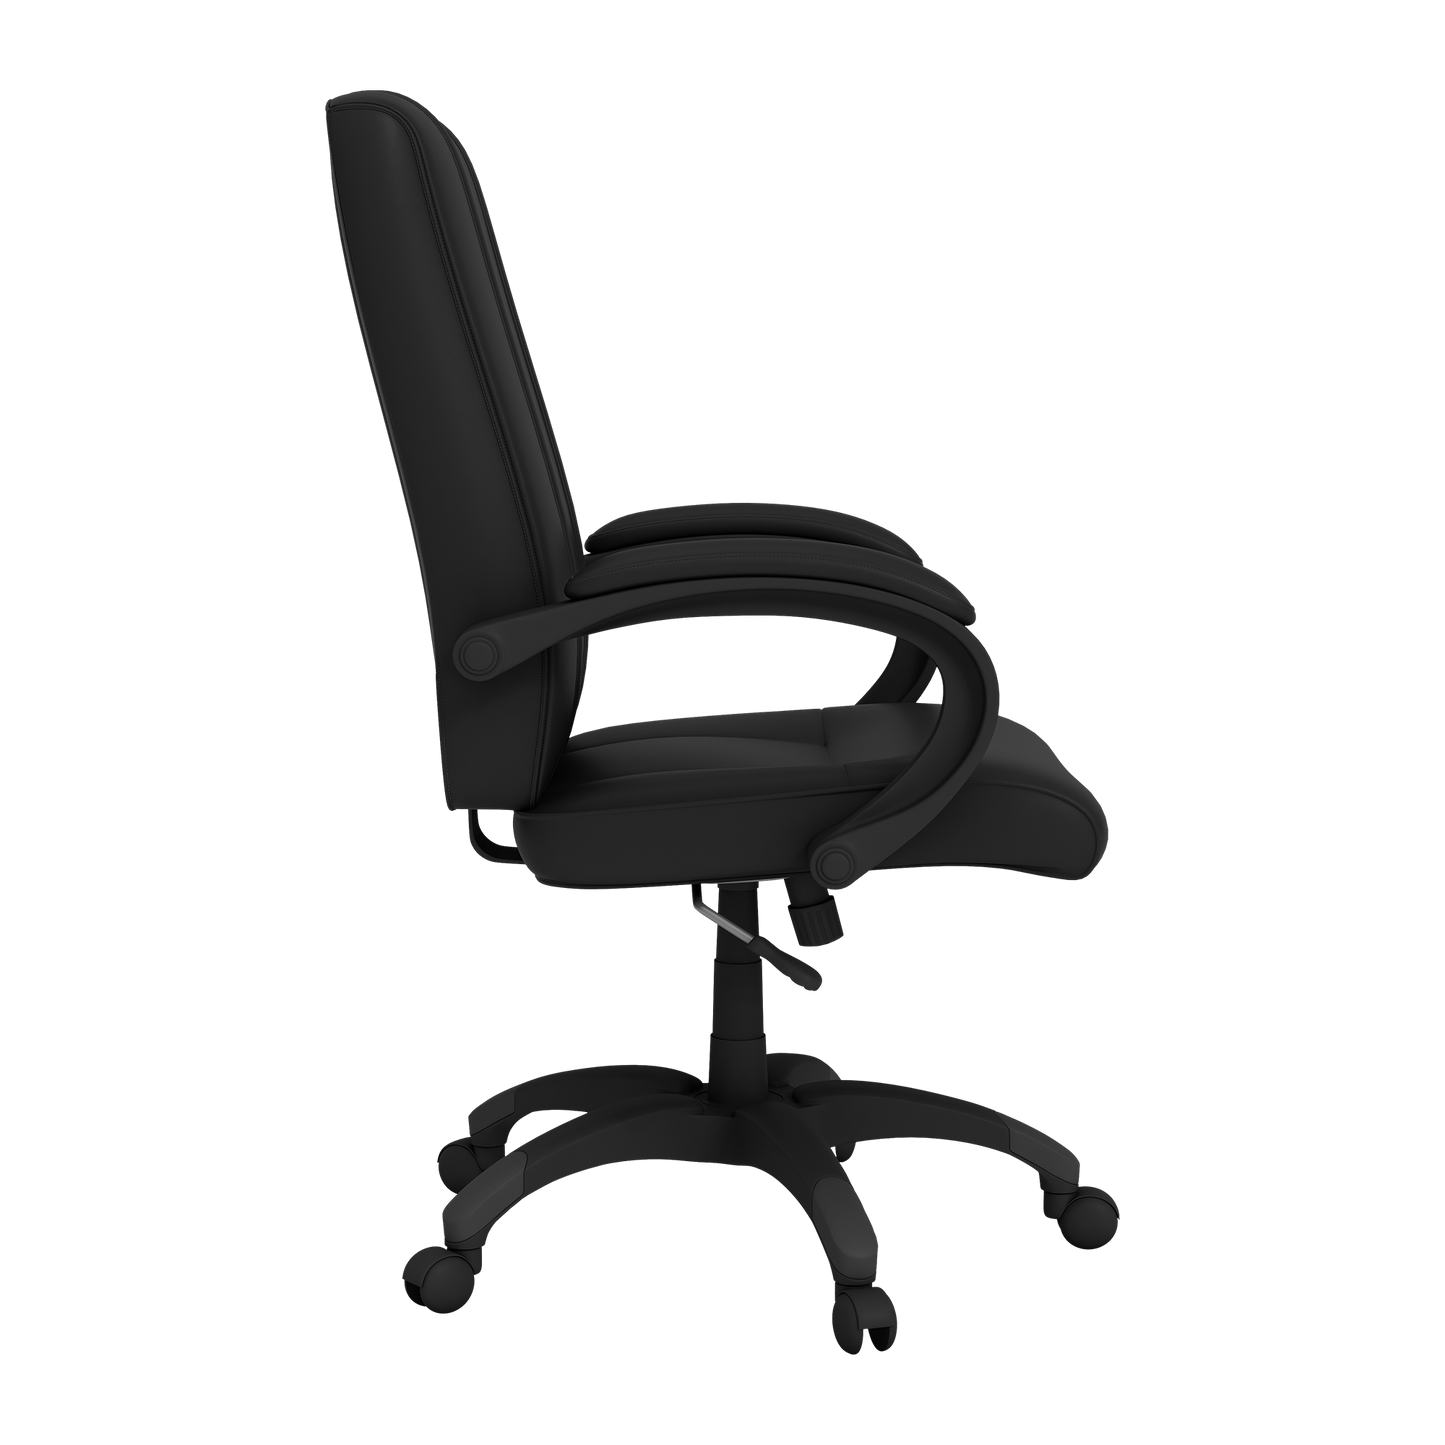 Office Chair 1000 with  Philadelphia Eagles Secondary Logo